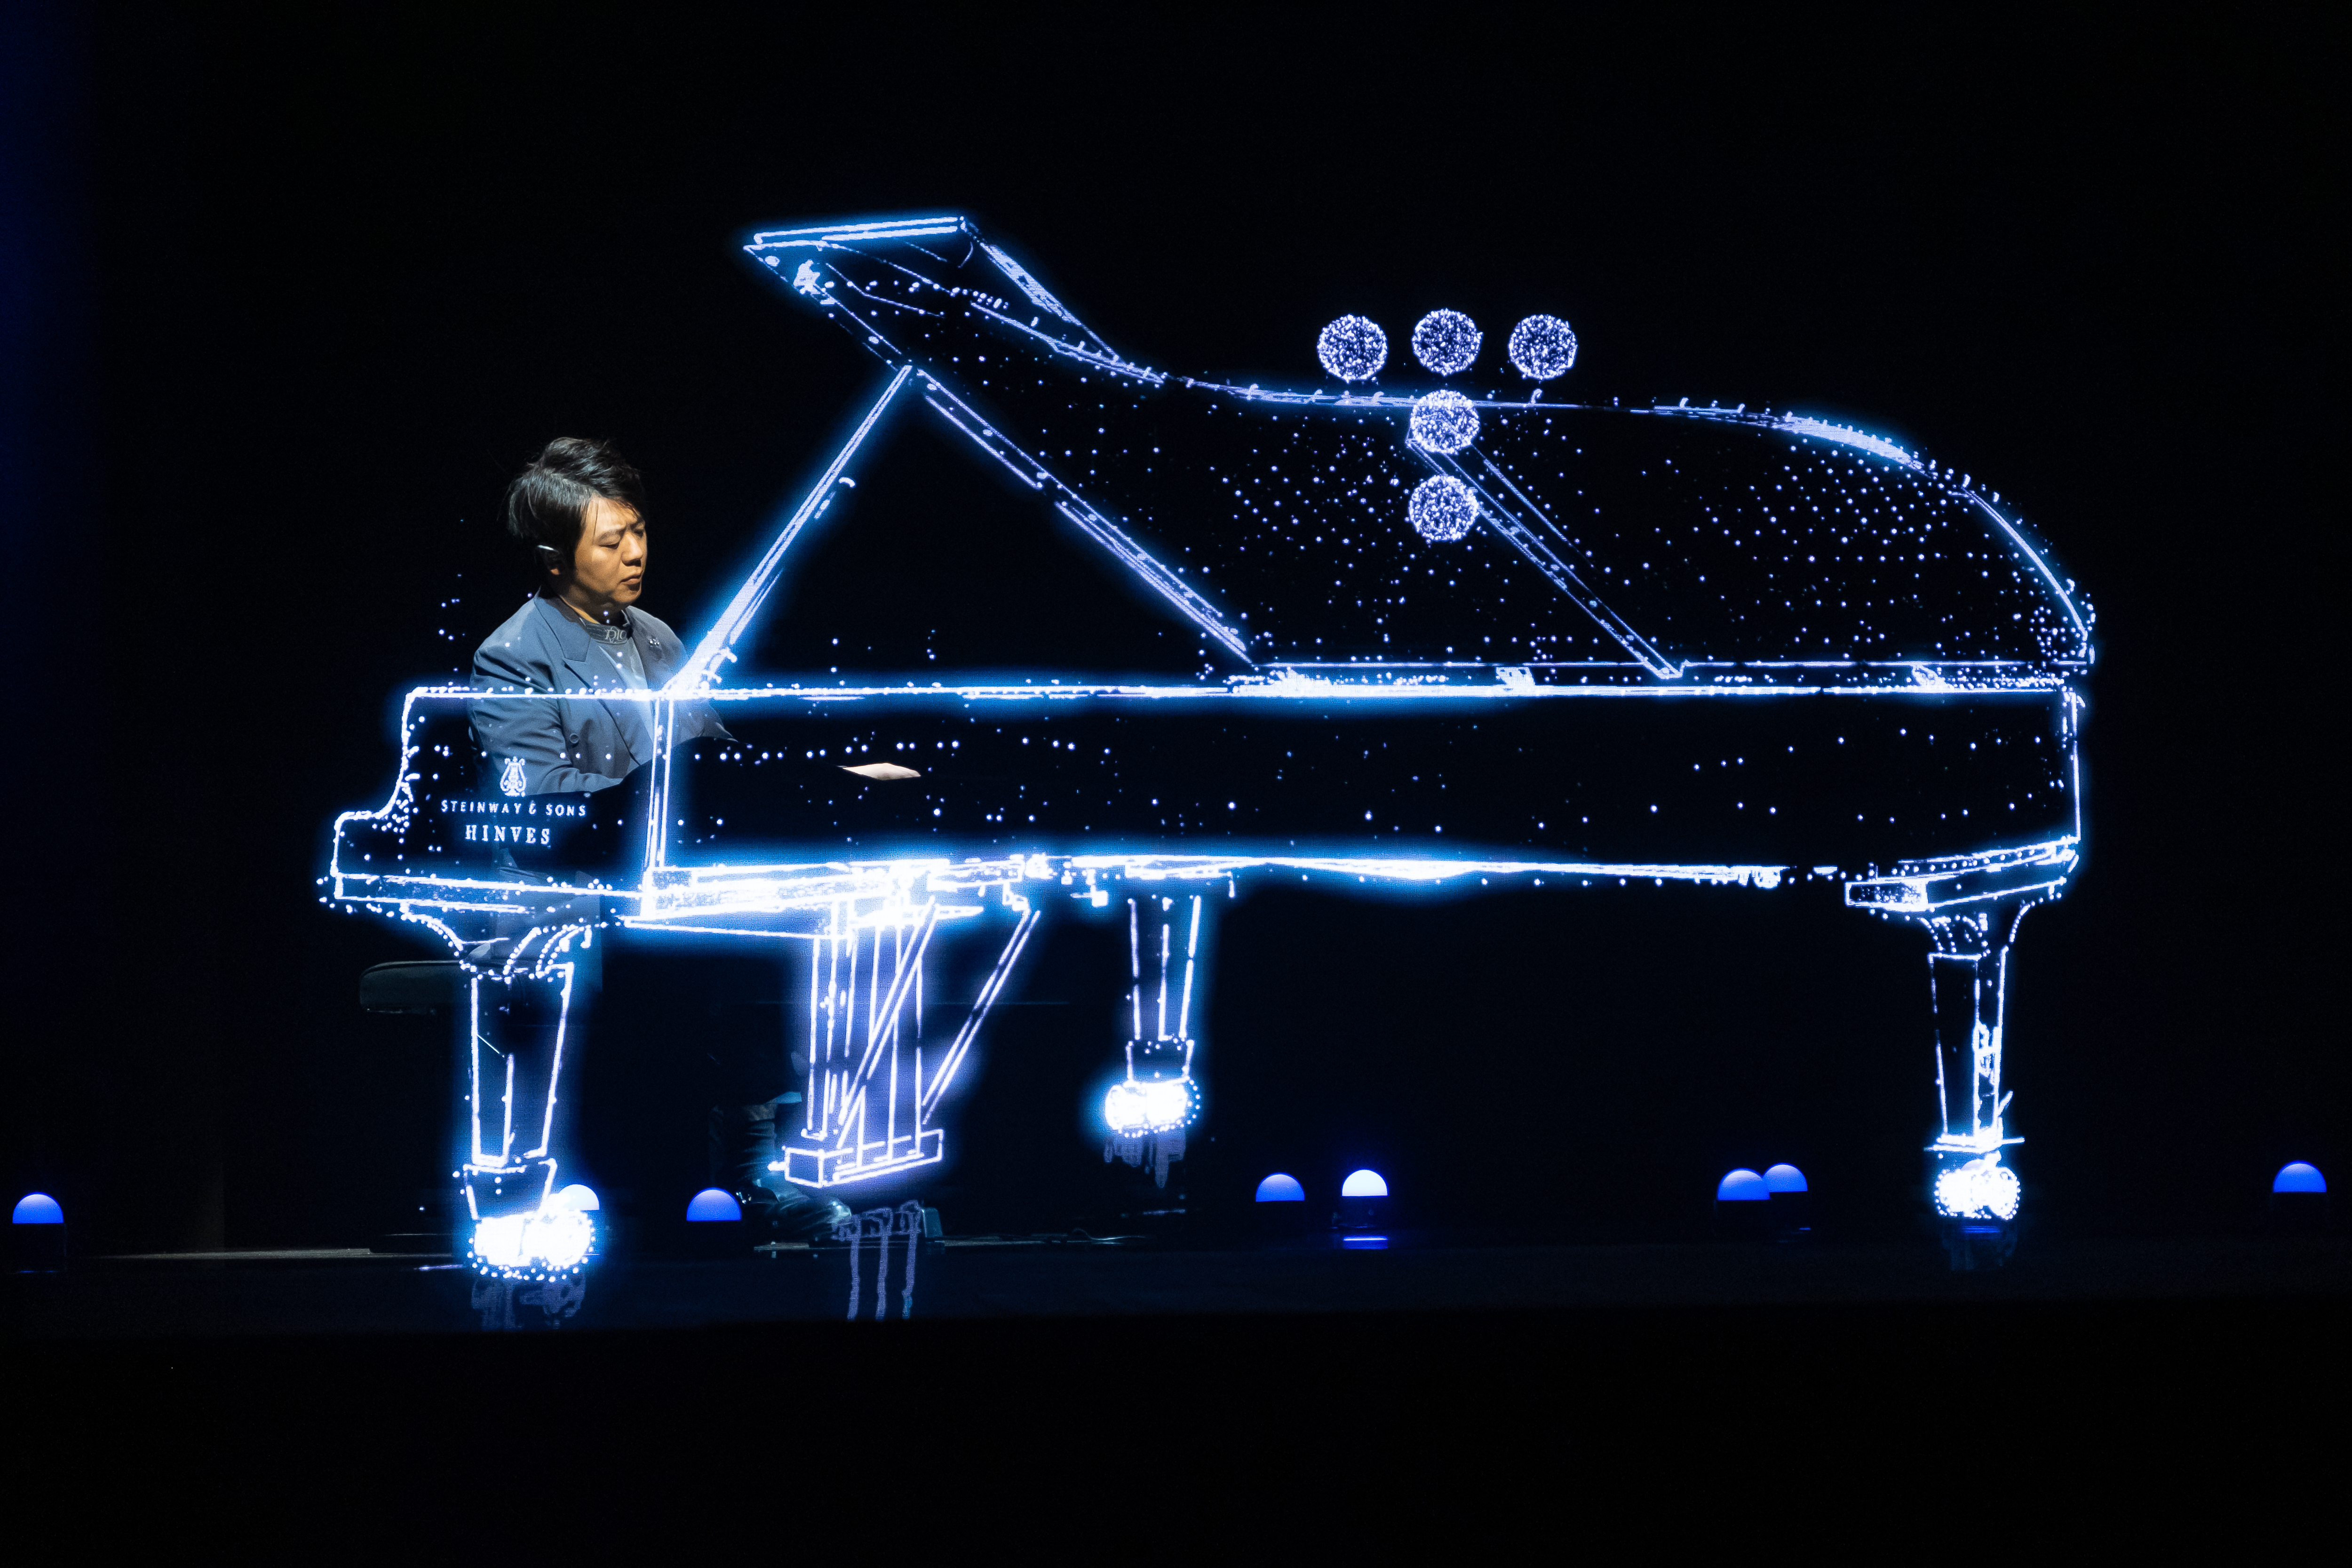 Celebrated pianist Lang Lang has performed classics by great composers, combining creativity and humanism with an unprecedented concentration of technology.